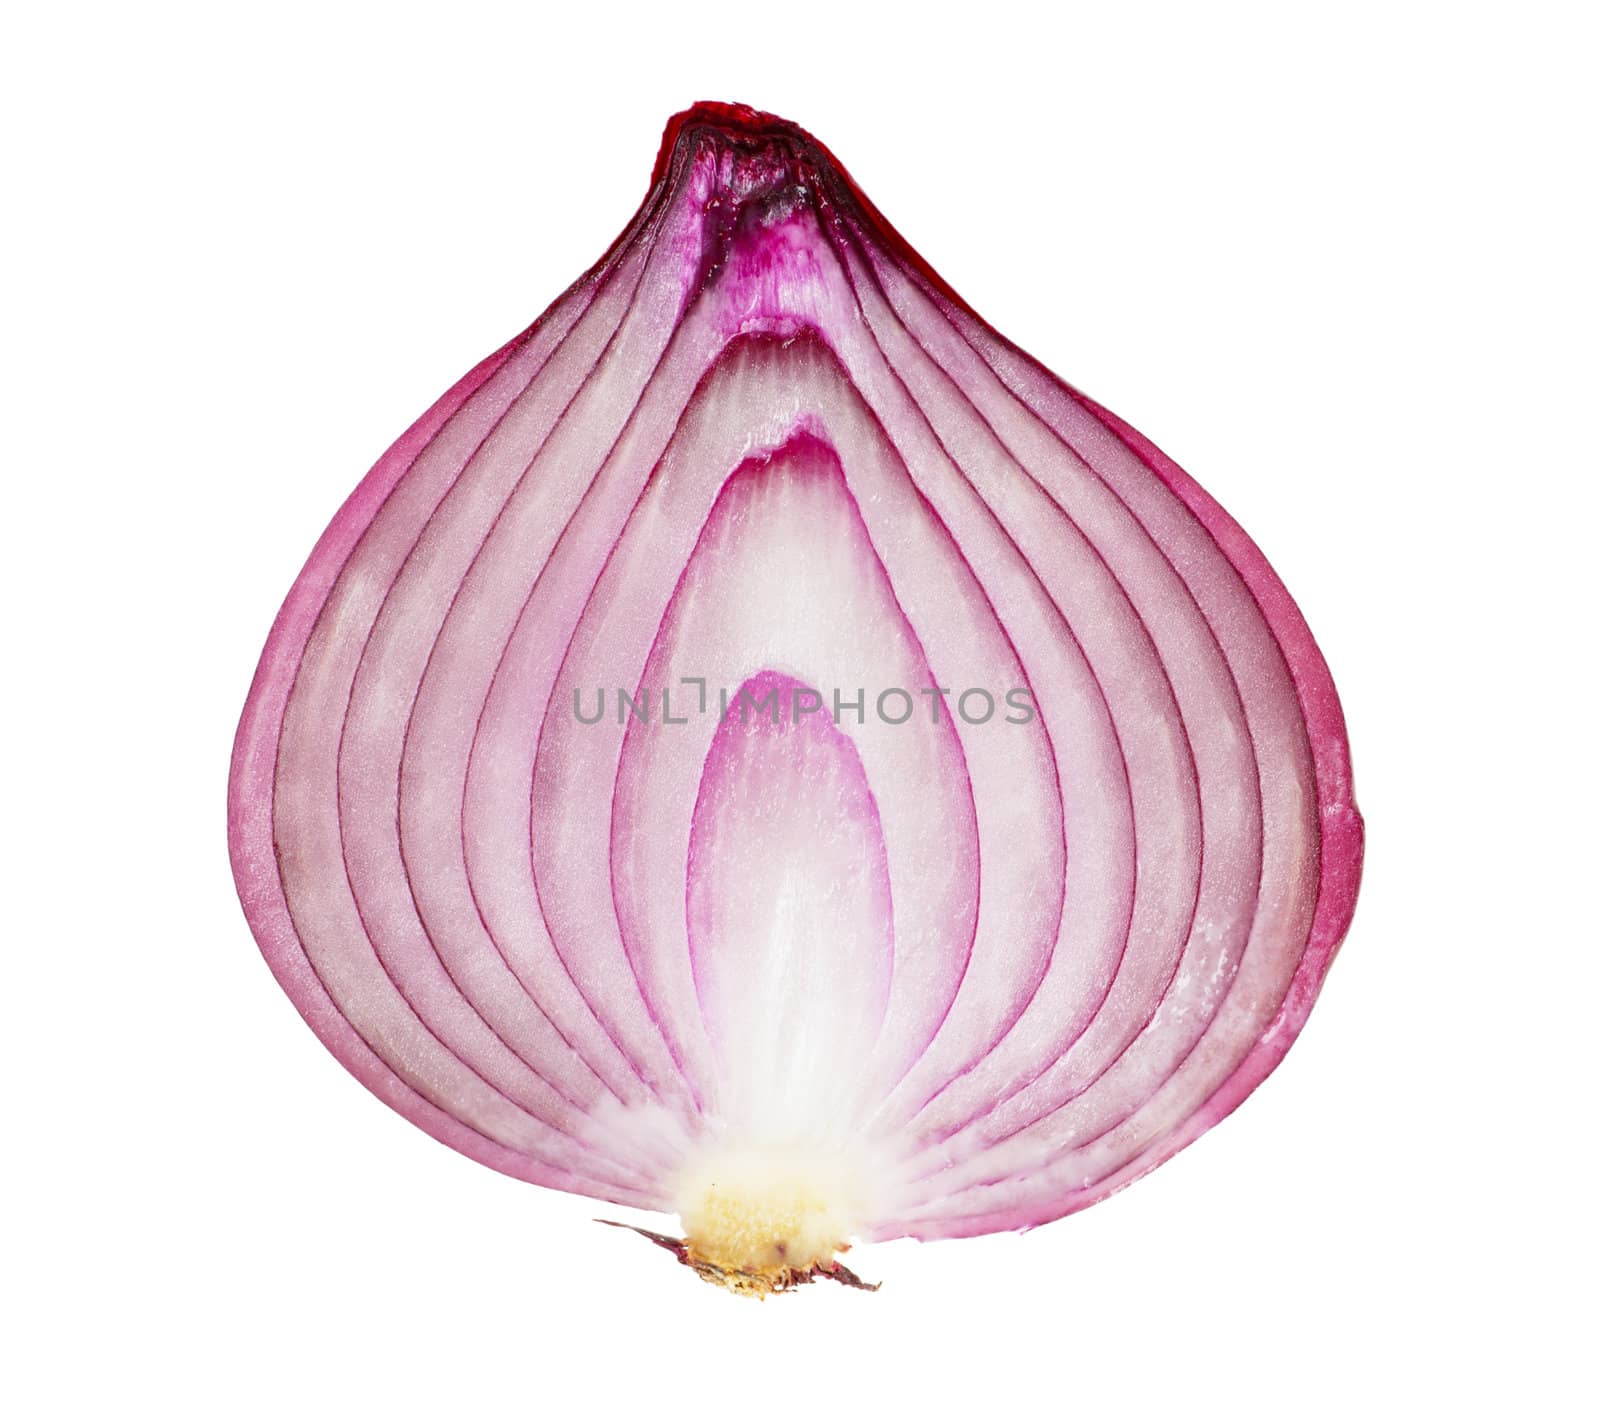 Red onion by AGorohov